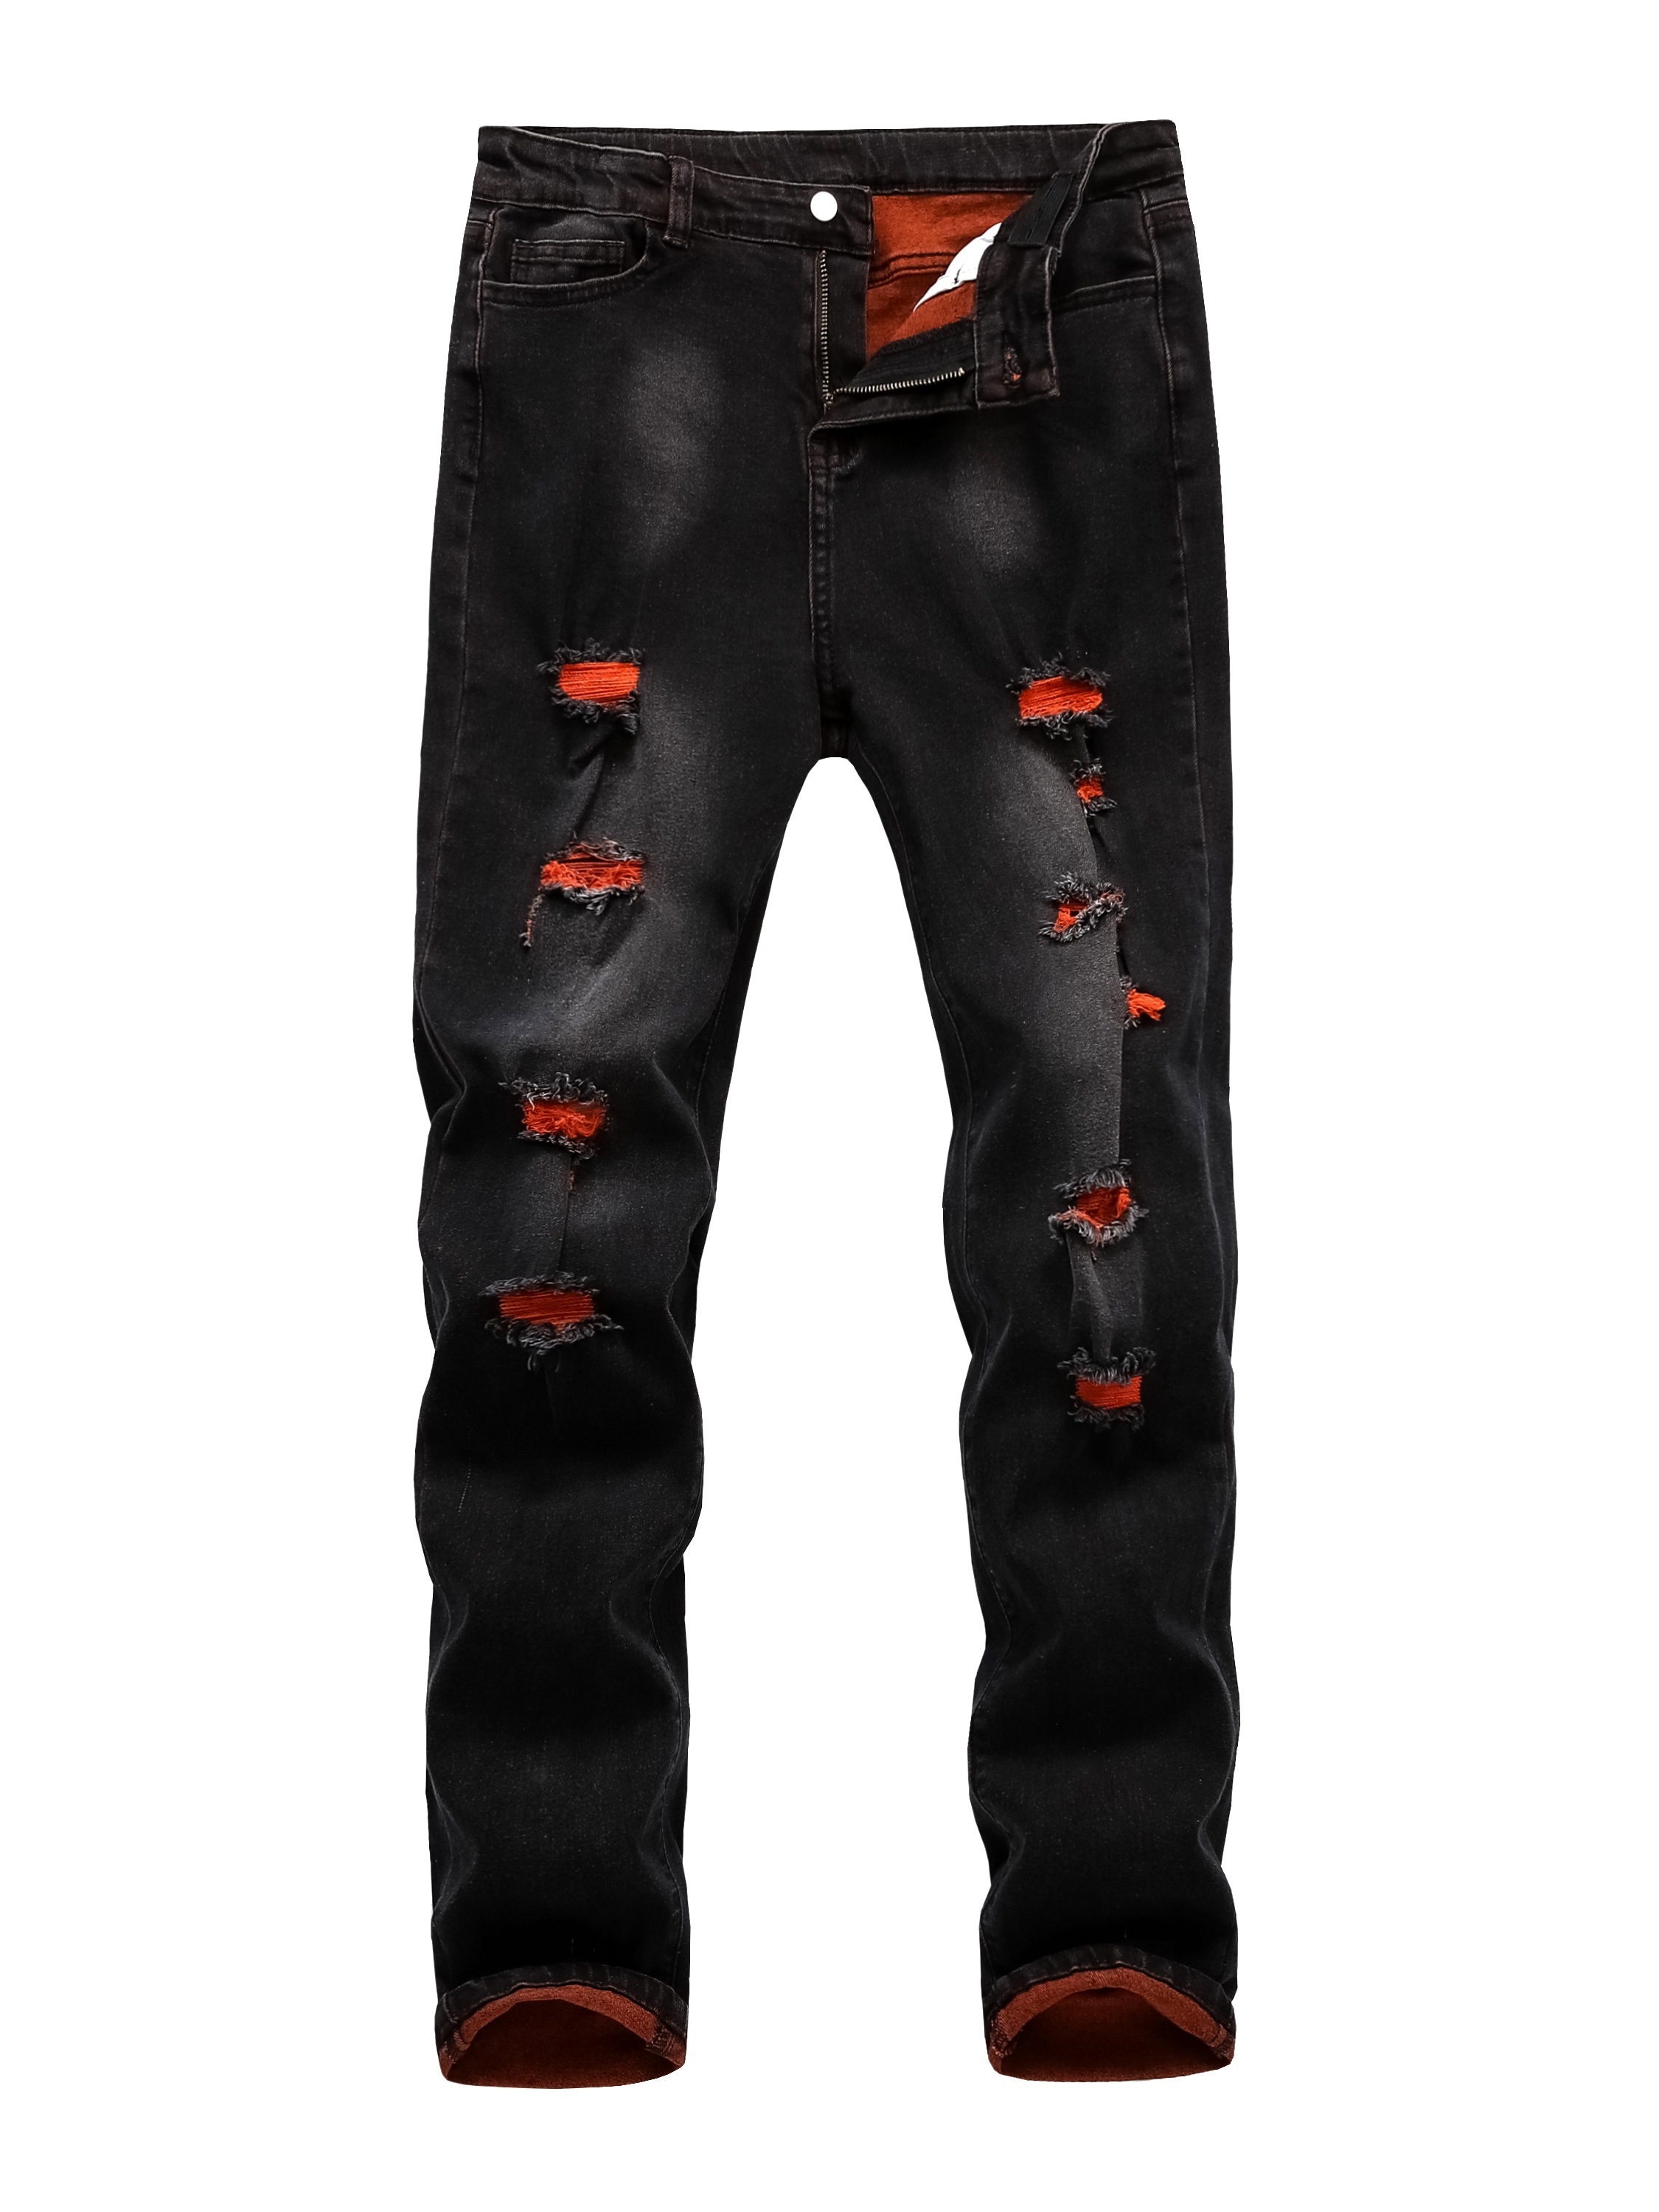 Kid's Skeleton Print Jeans, Denim Pants With Pockets, Boy's Novelty Clothes  For All Seasons